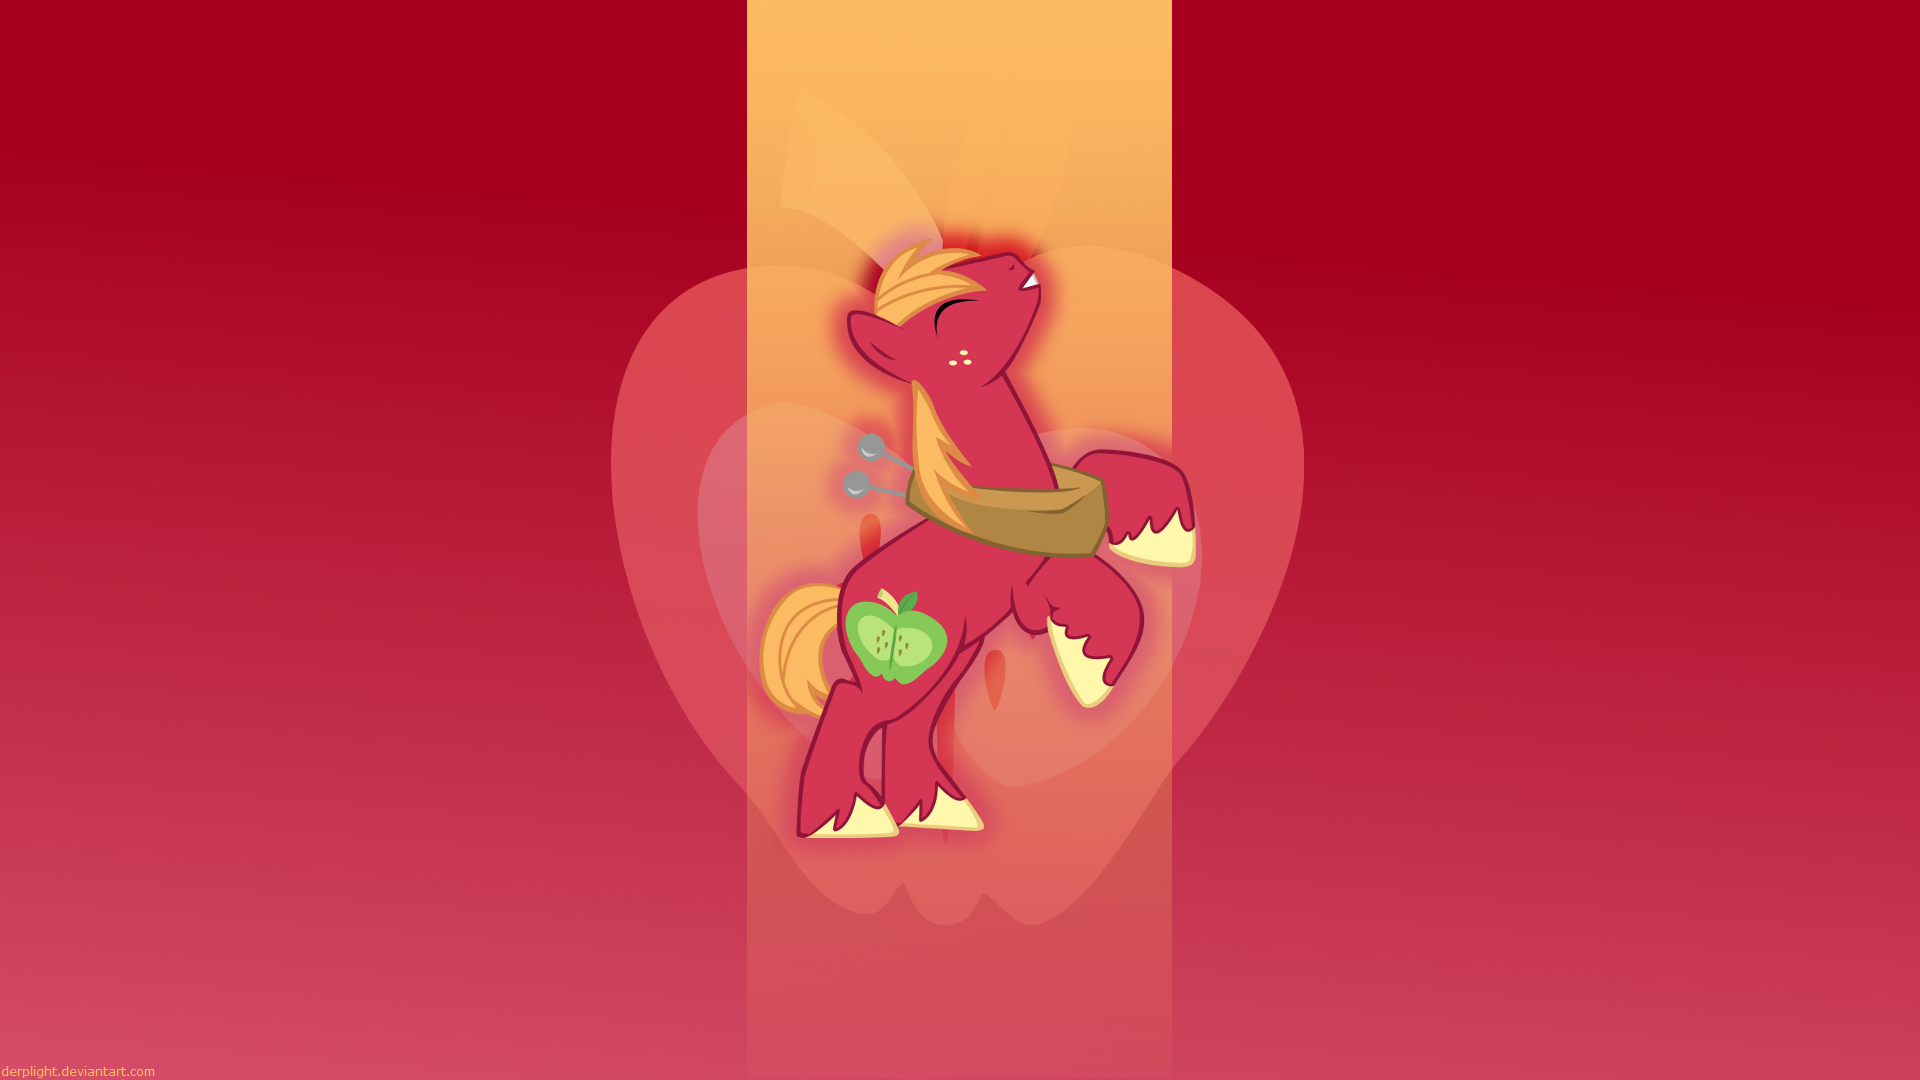 Big Macintosh Wallpaper by DerpLight, LcPsycho and The-Smiling-Pony